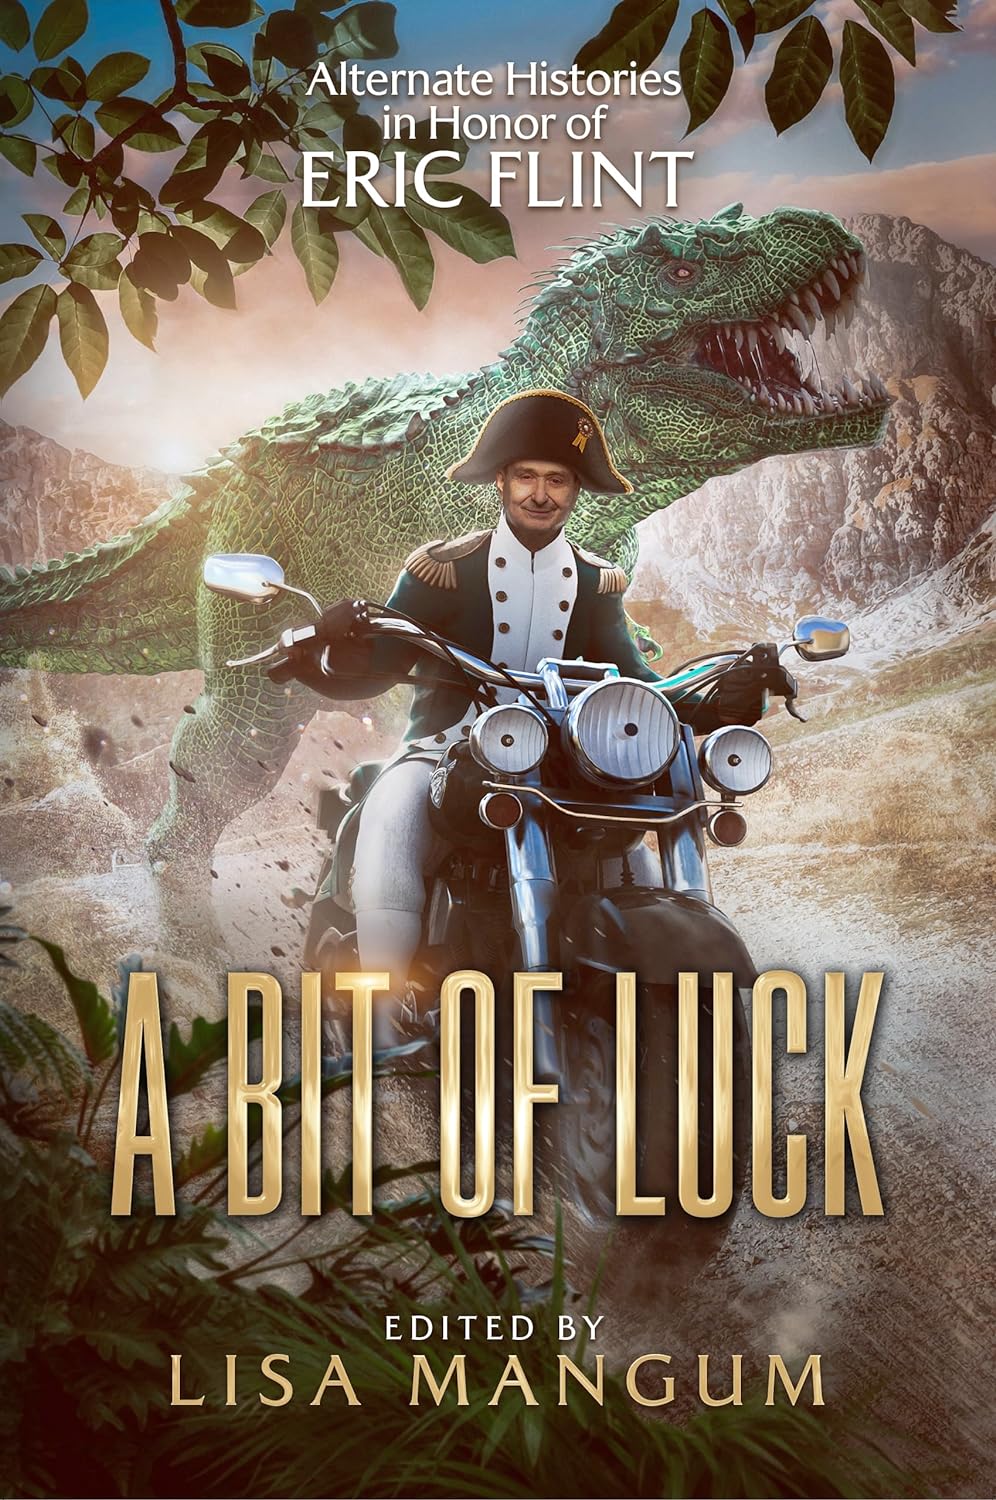 Eric flint wears a Napoleonic uniform while riding an old school motorcycle in front of a charging t-rex